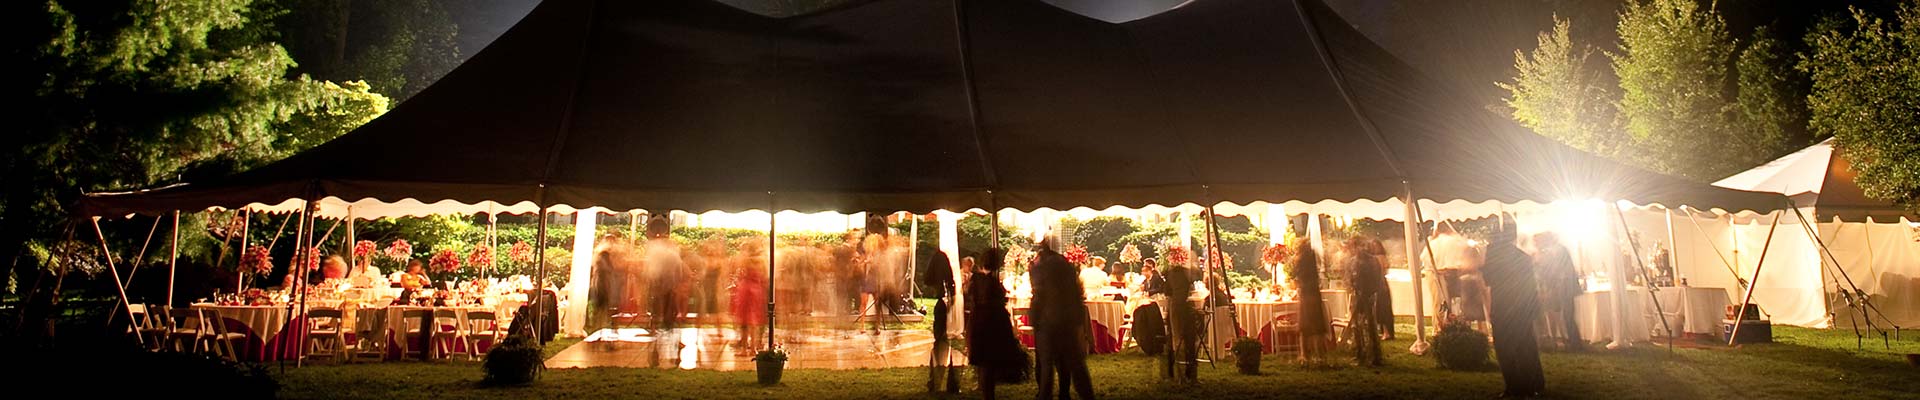 Outdoor wedding celebration under a tent. People dancing and eating